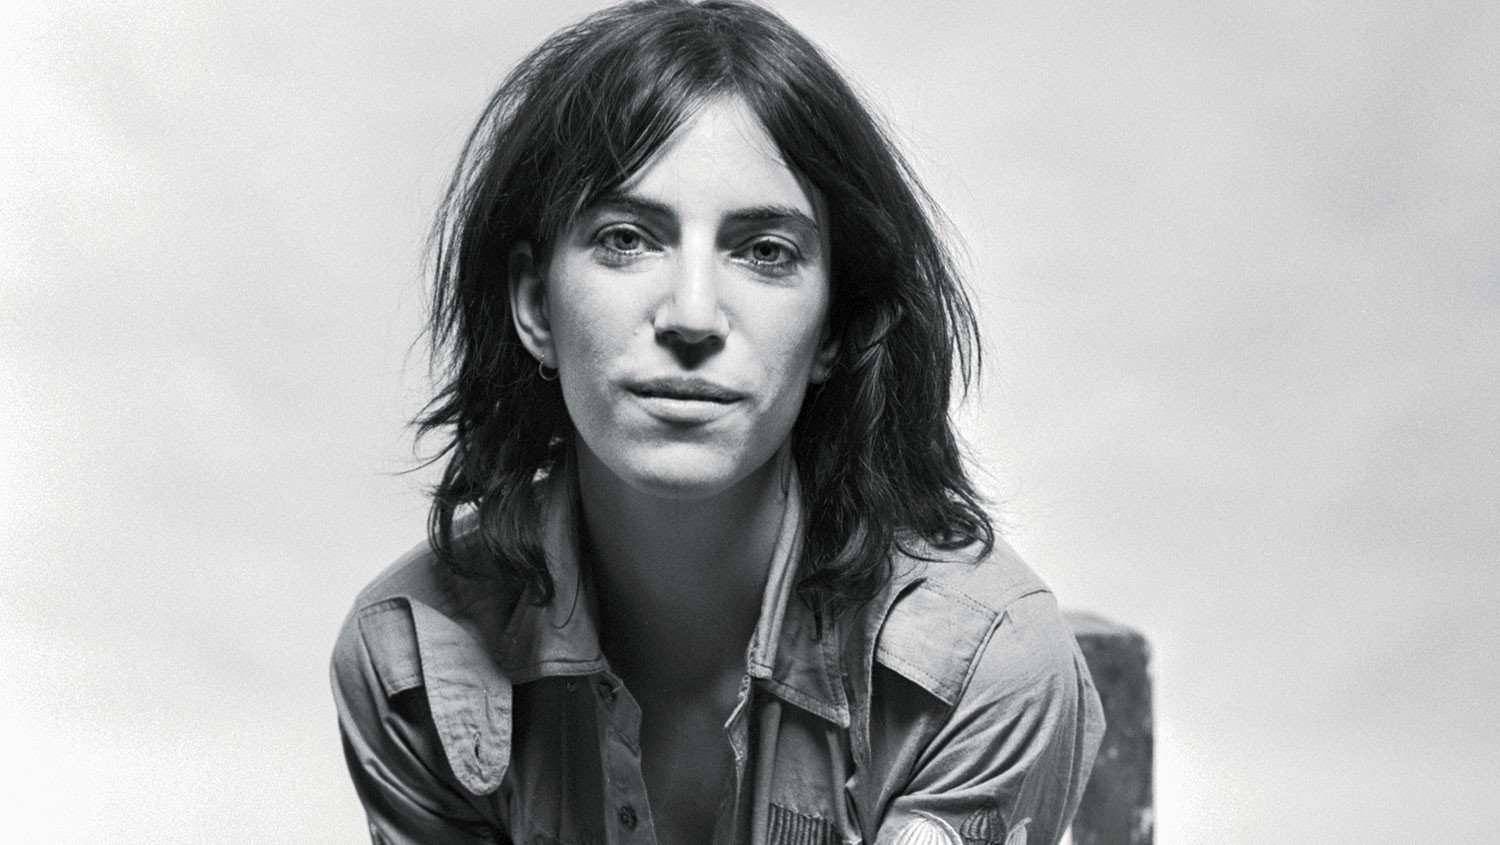 Please join us here at in wishing the one and only Patti Smith a very Happy Birthday today  